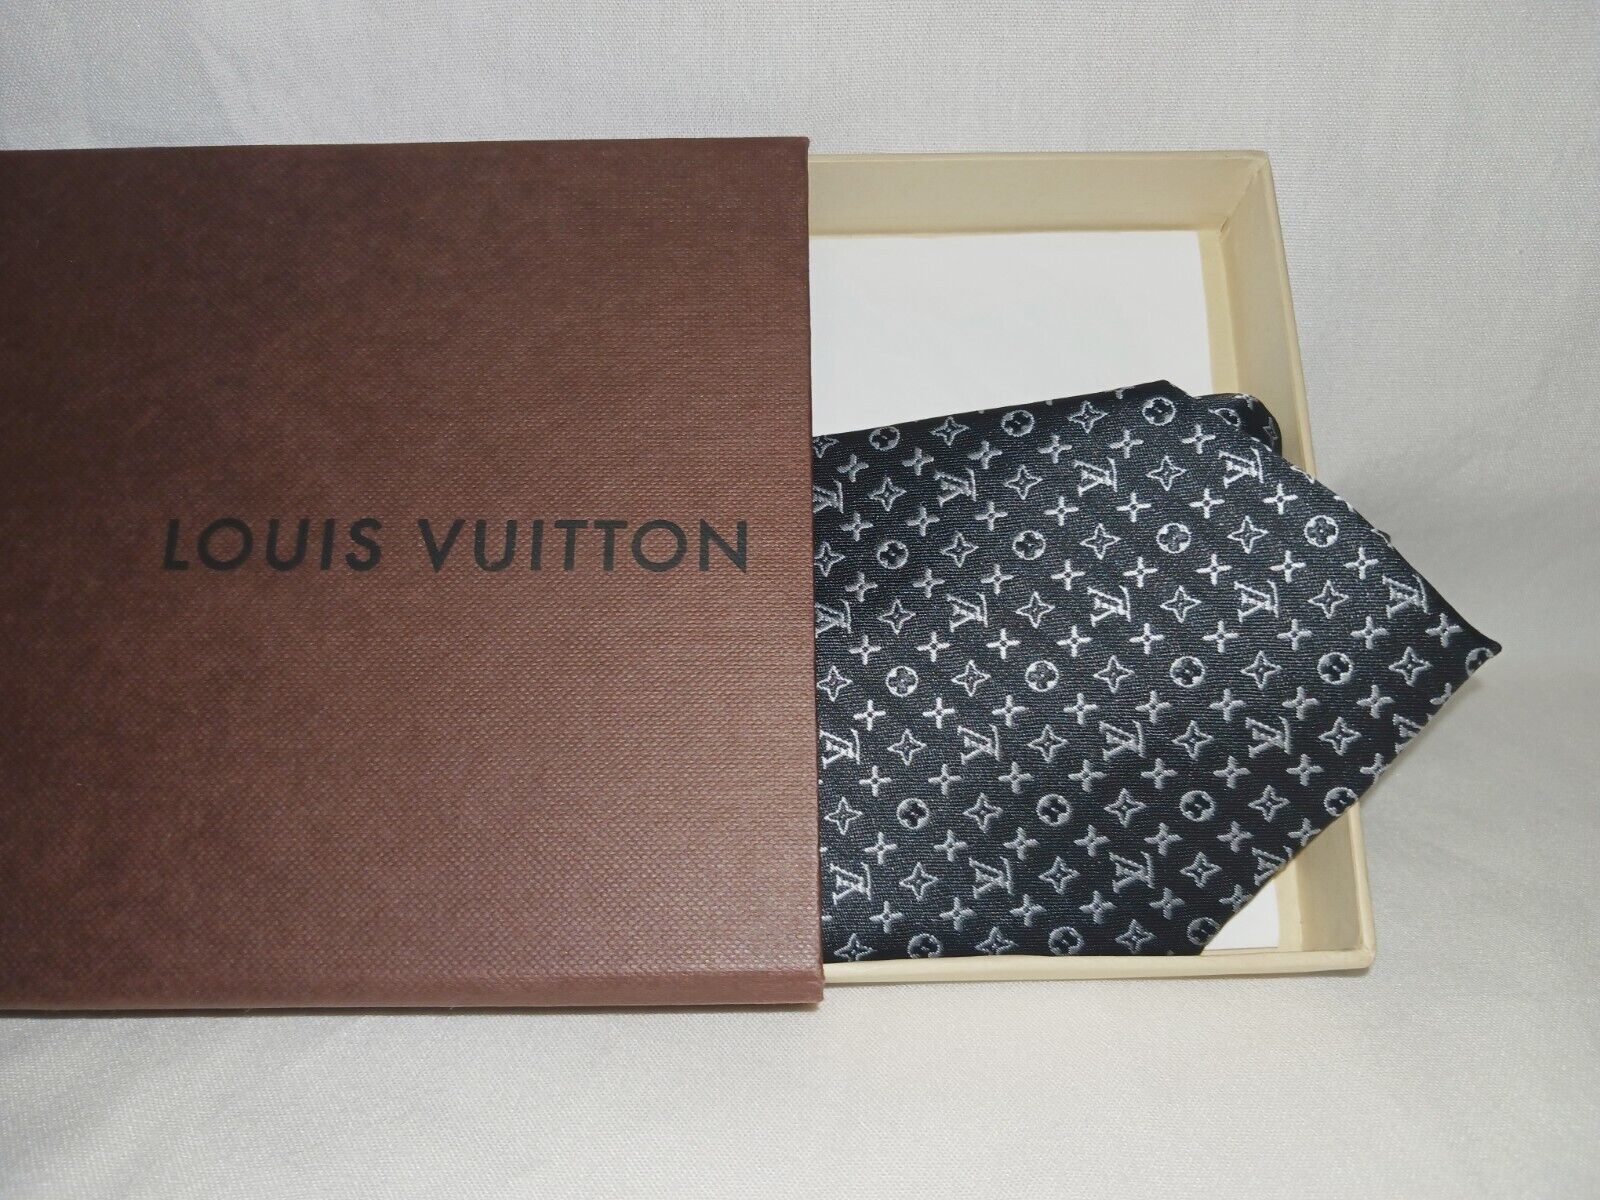 Louis Vuitton Monogram Embroidered Bow Tie - Black Bow Ties, Suiting  Accessories - LOU210801